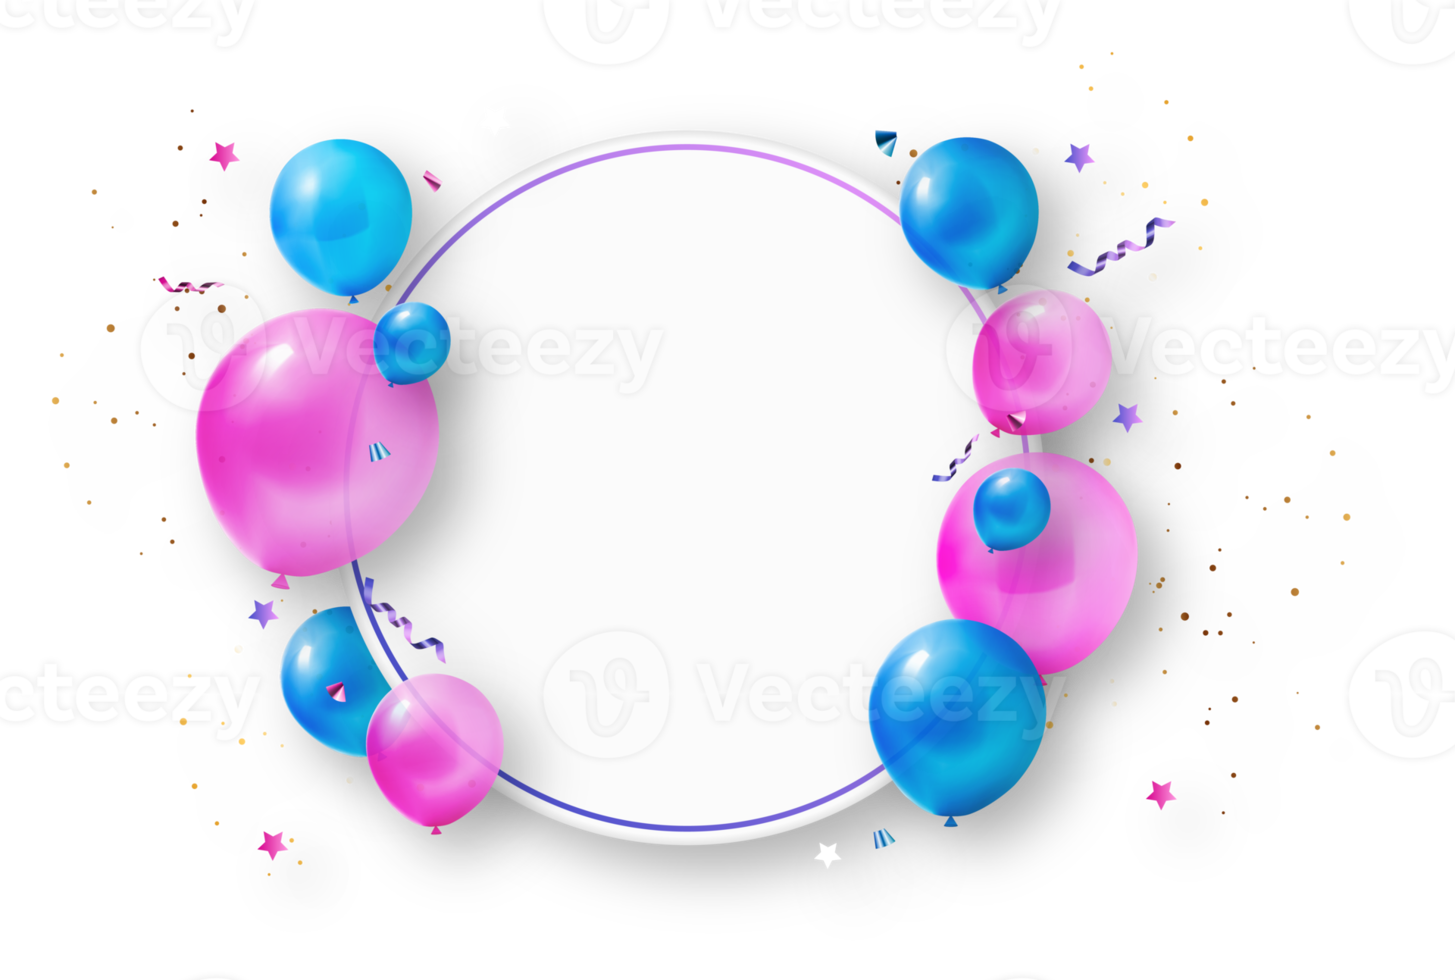 Colorful Holiday Party Balloons Illustration png